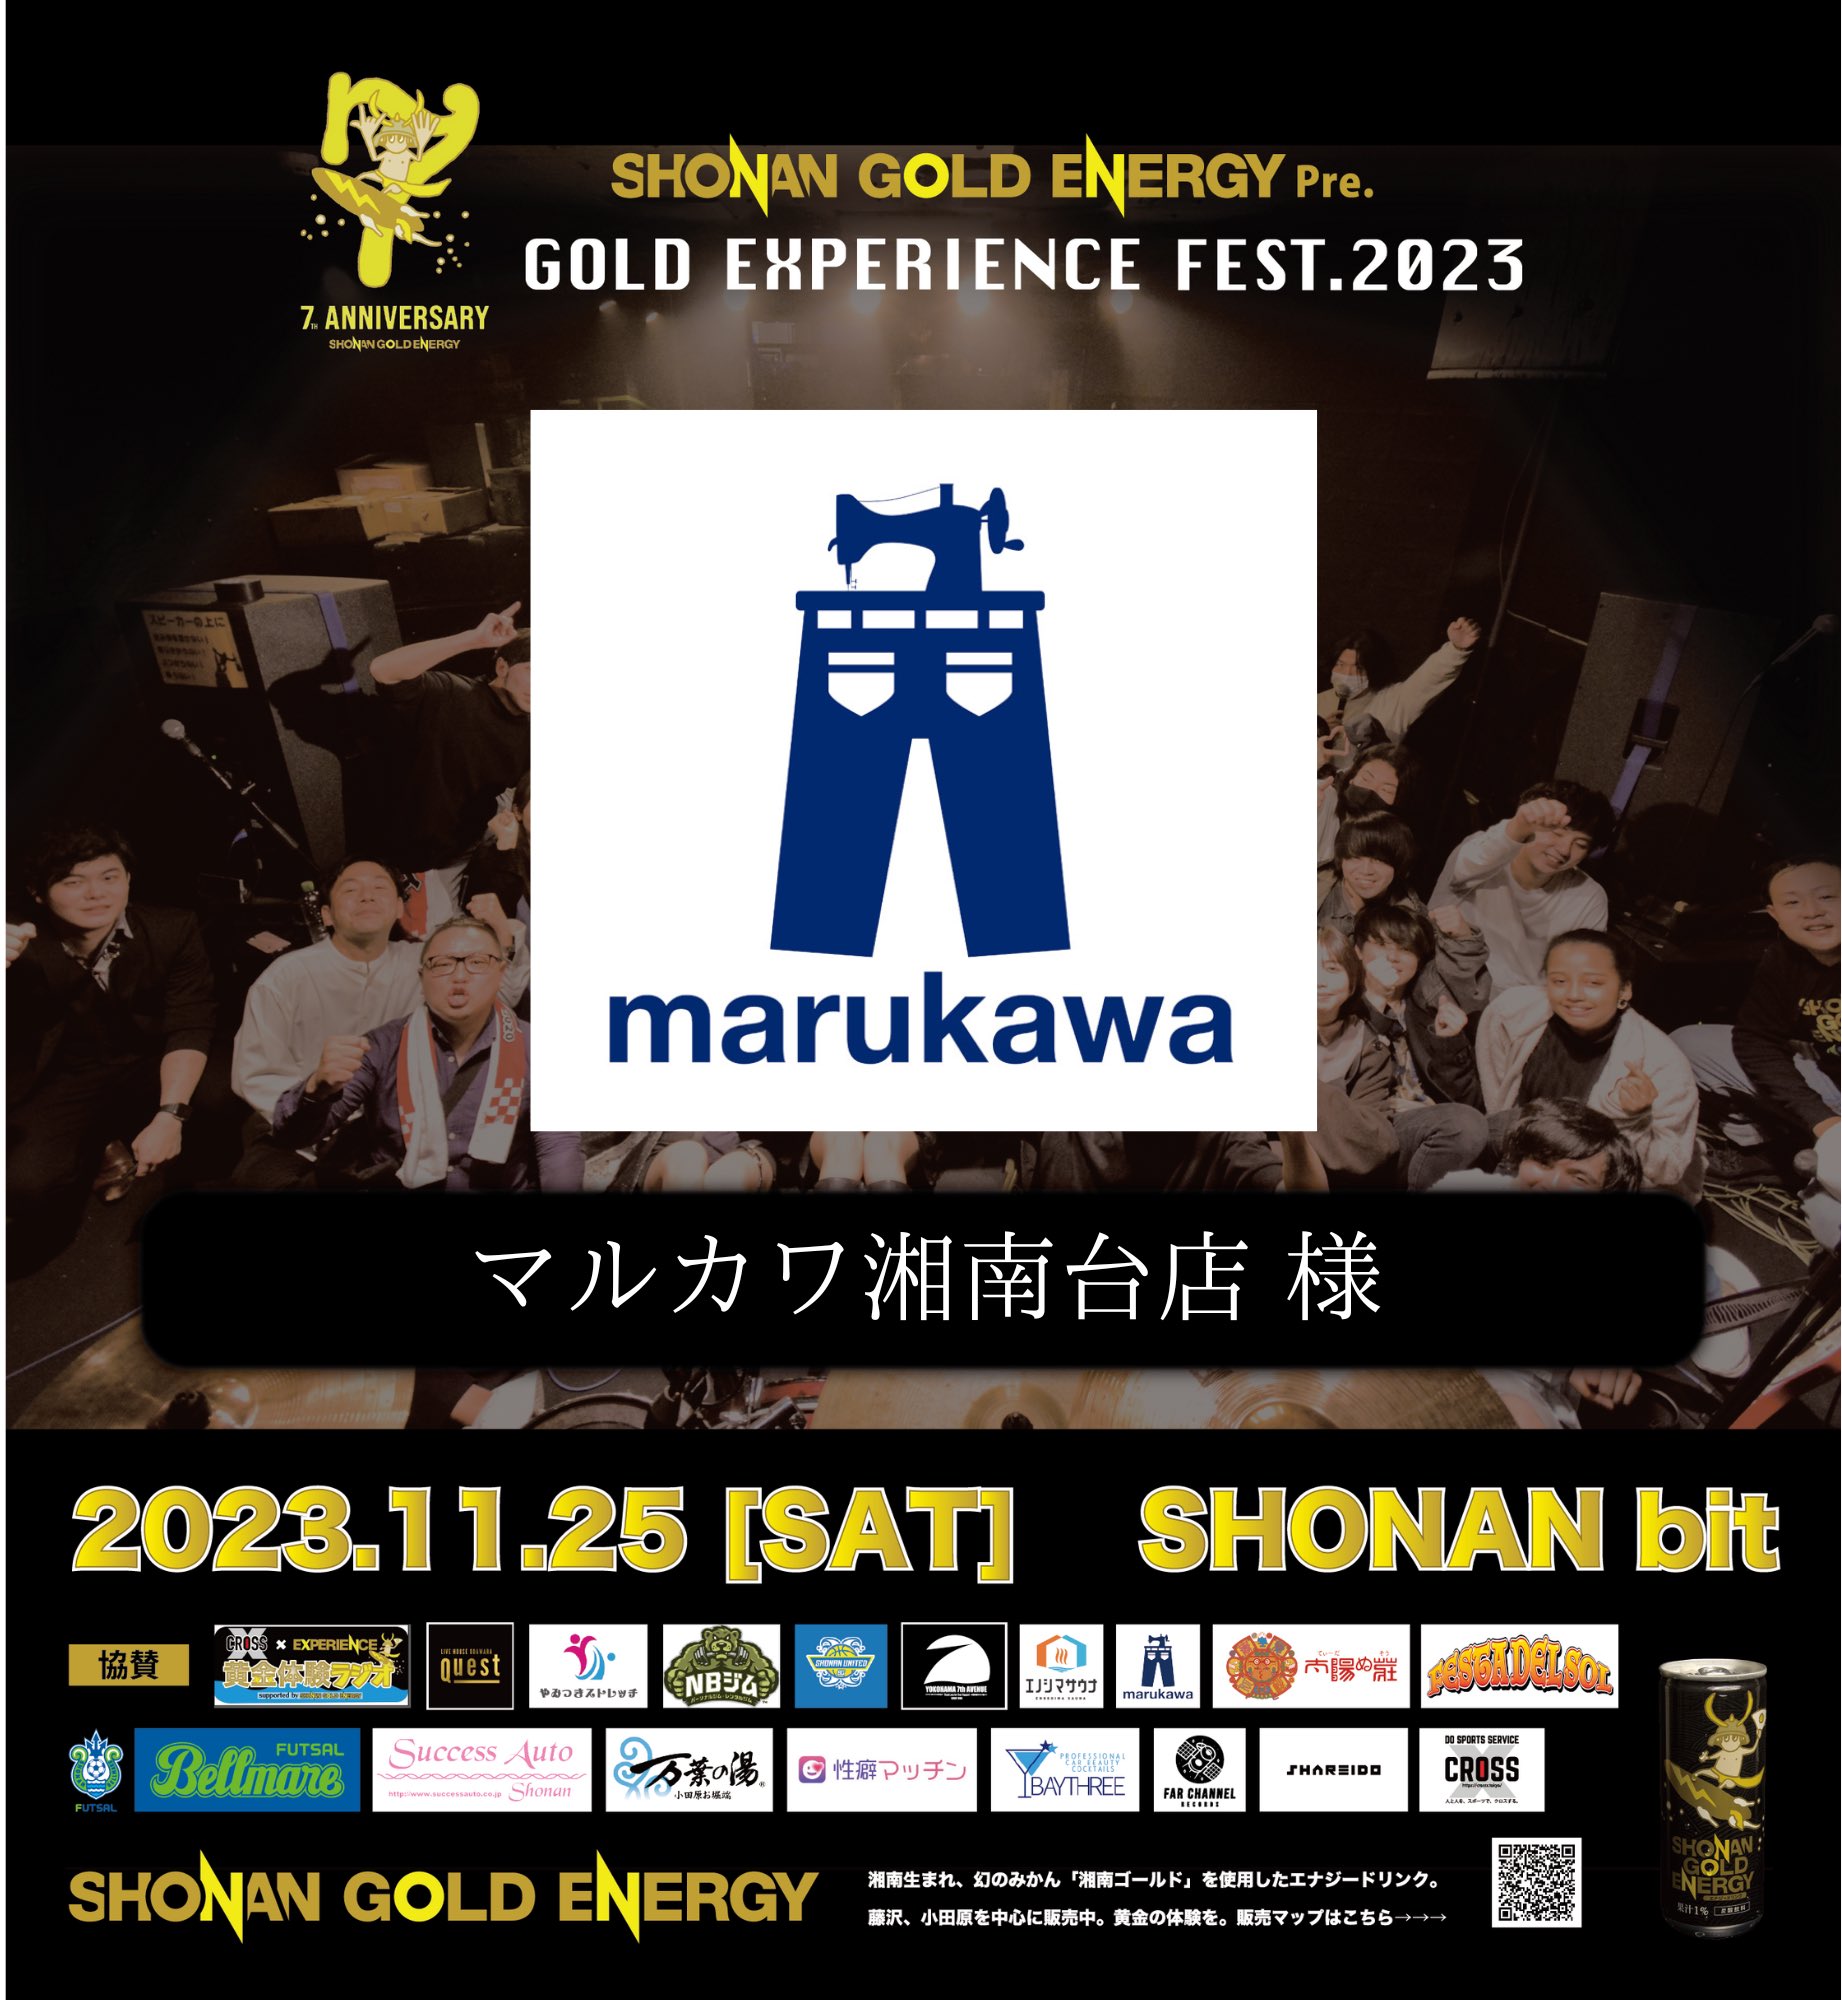 『GOLD EXPERIENCE FEST.2023』に協賛させていただきました。